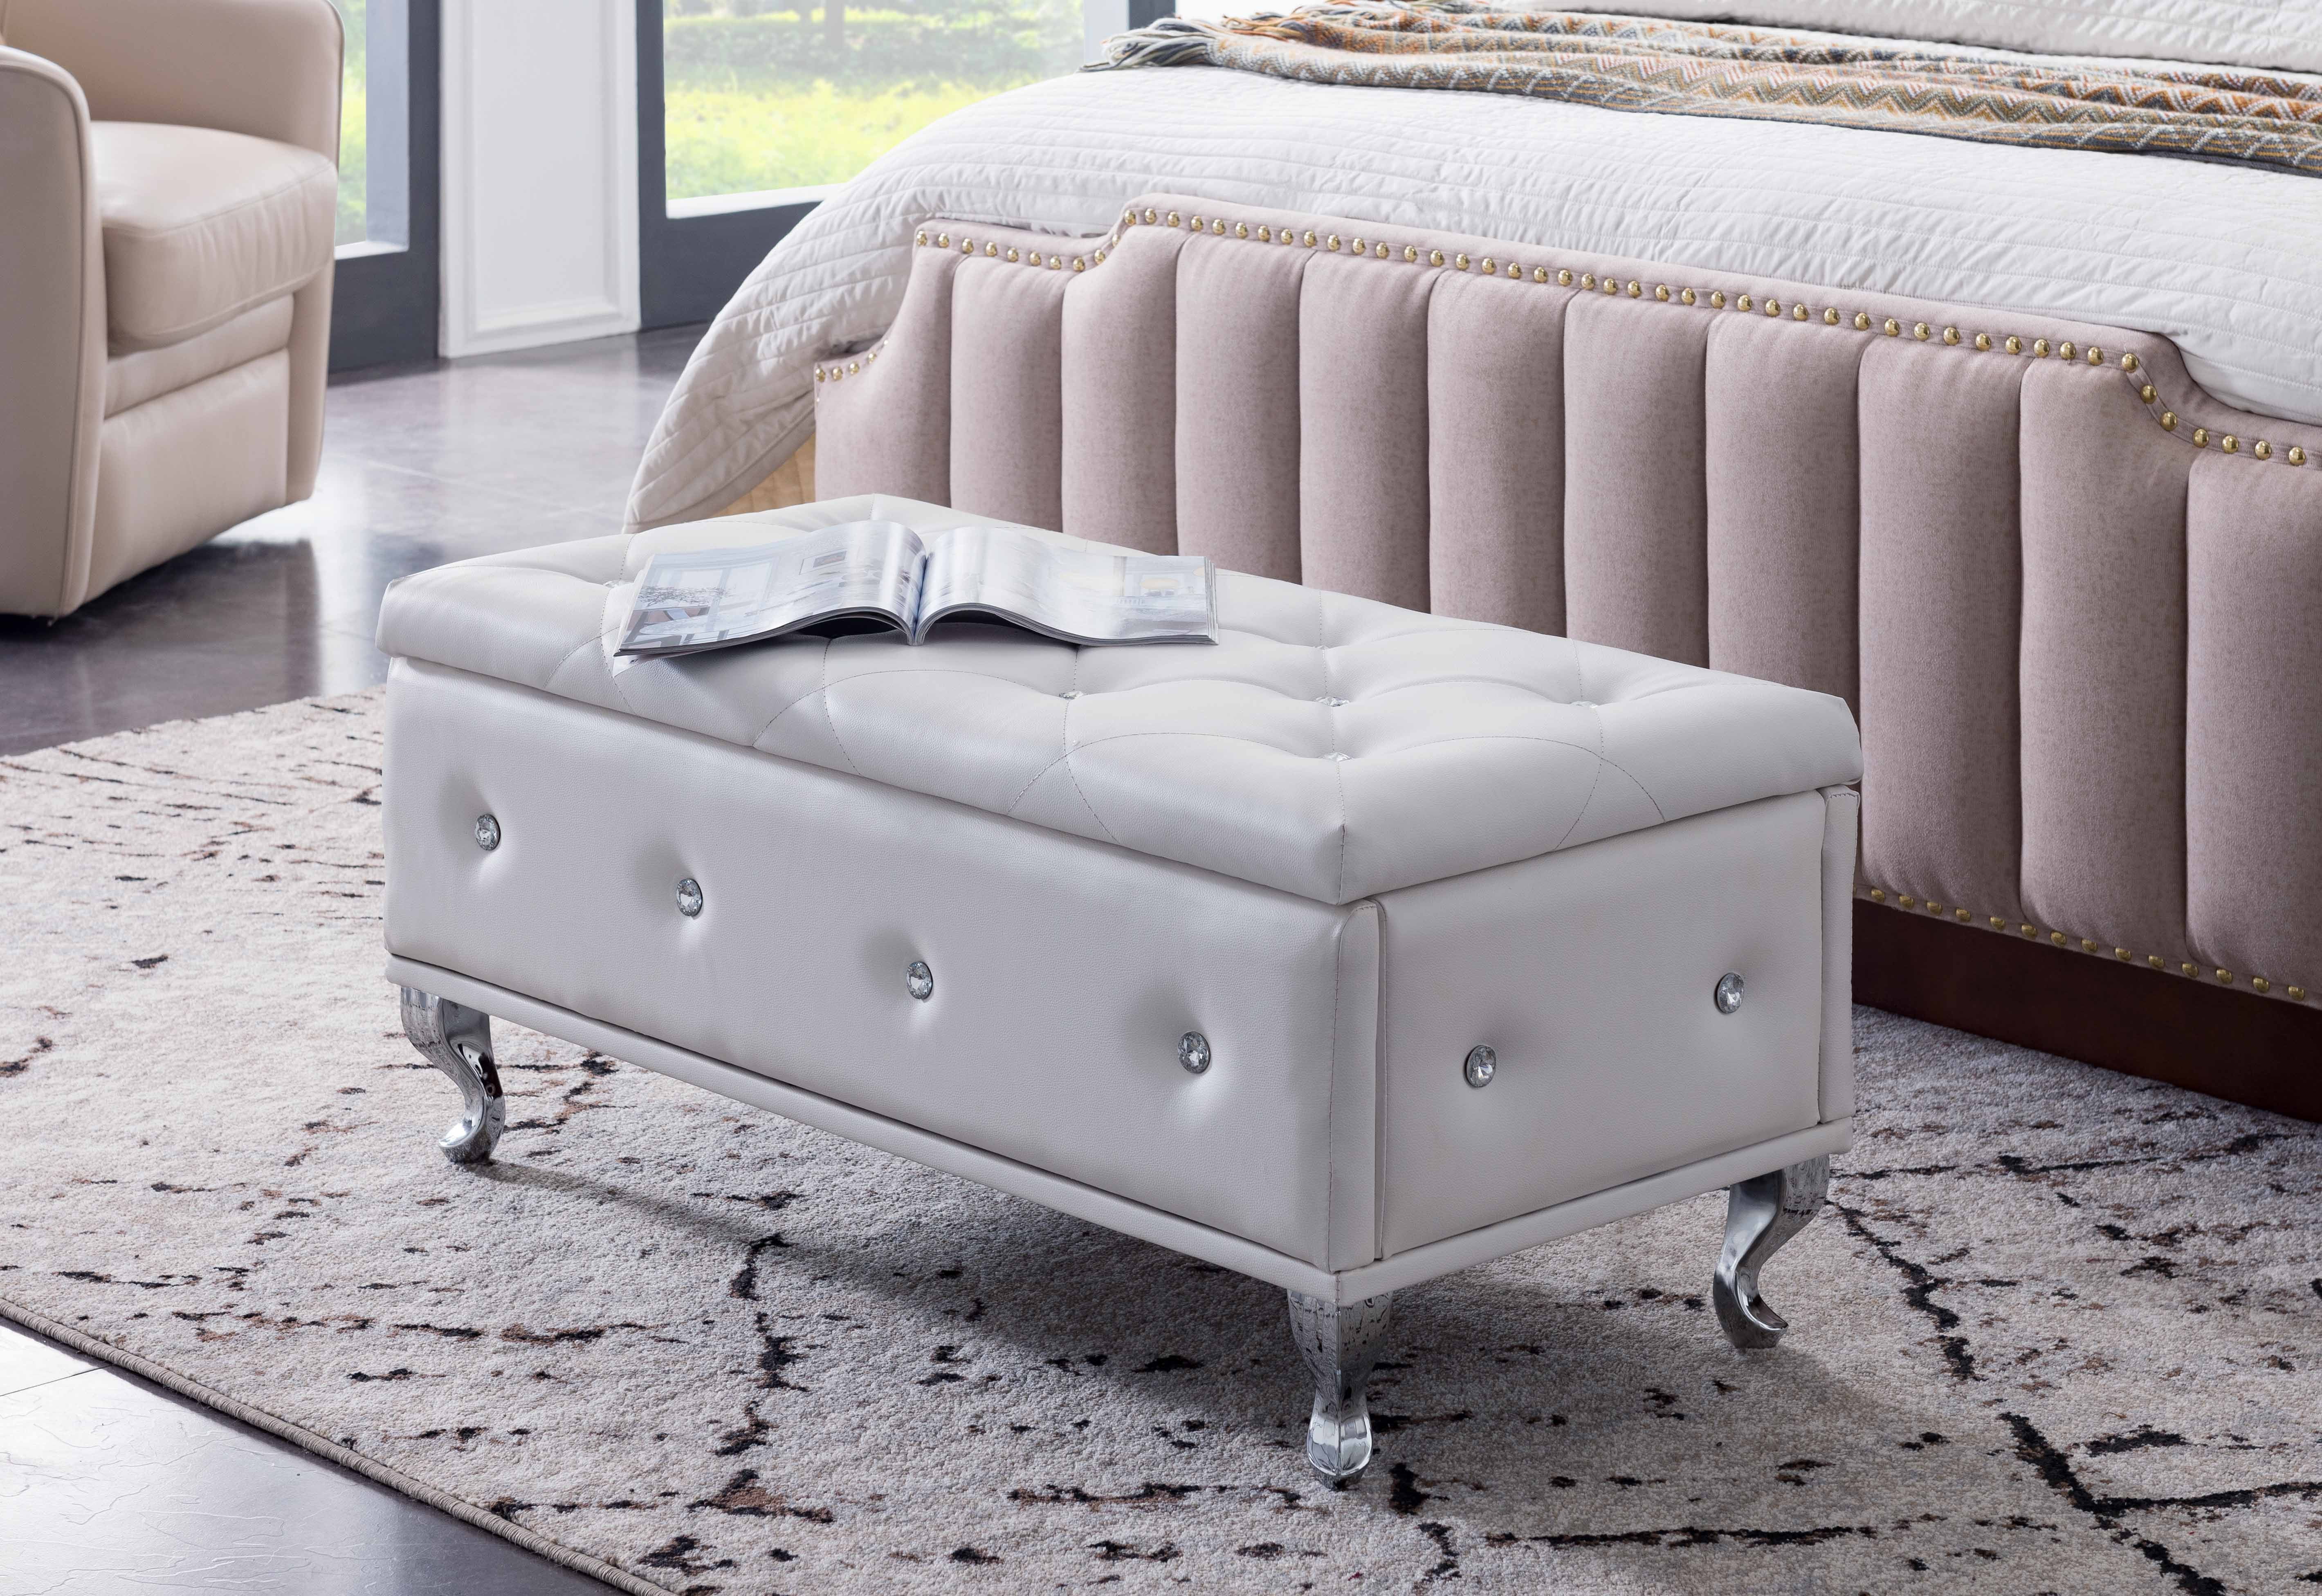 Jane White Upholstered Faux Leather, Leather Storage Ottoman Bench Tufted